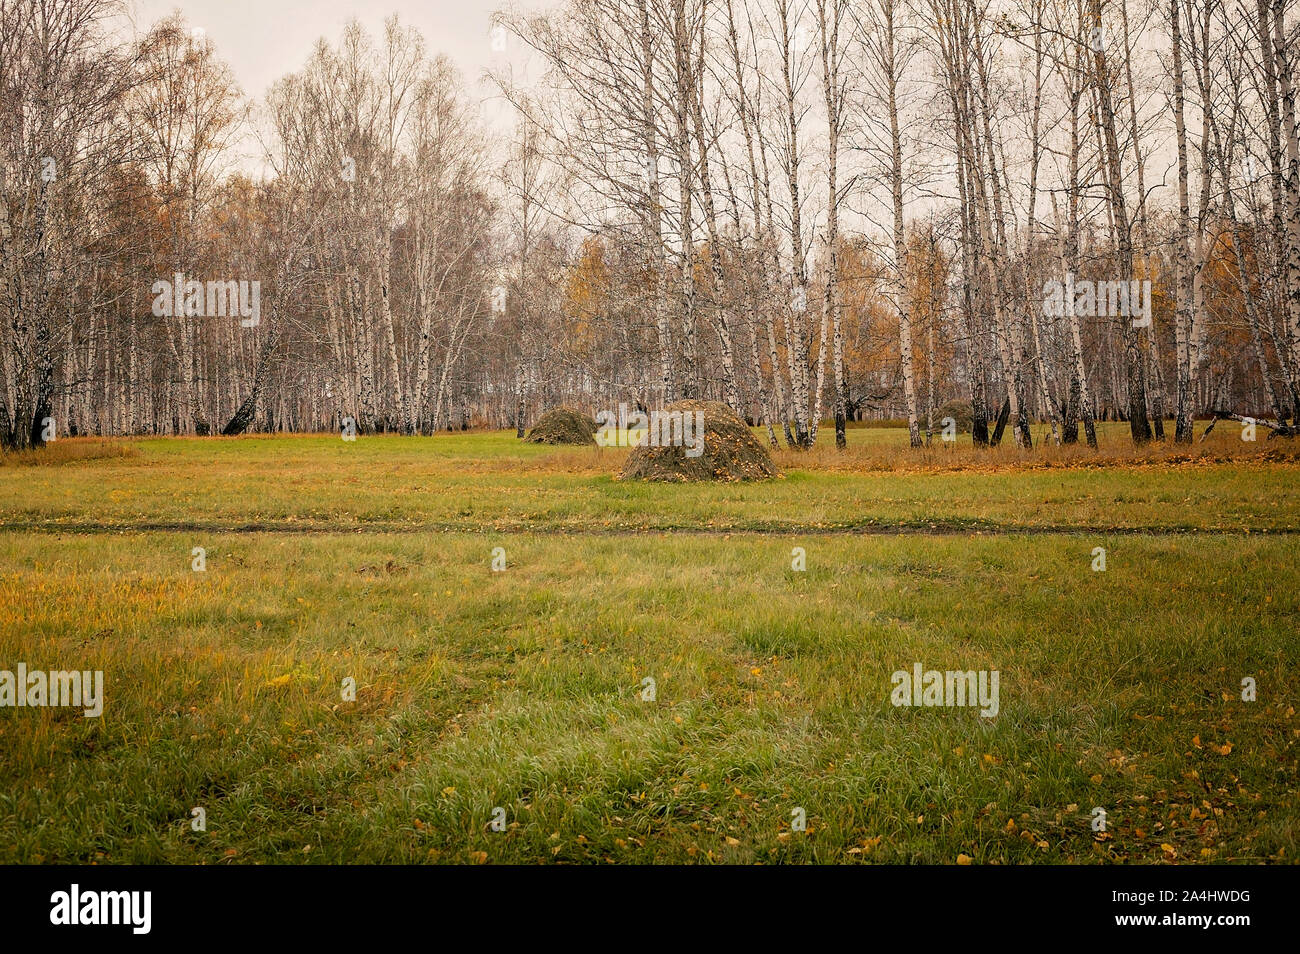 Rural landscape. Haystacks on a background autumn forest. Food for wild animals in winter. Wildlife Care Concept. Horizontal shot Stock Photo